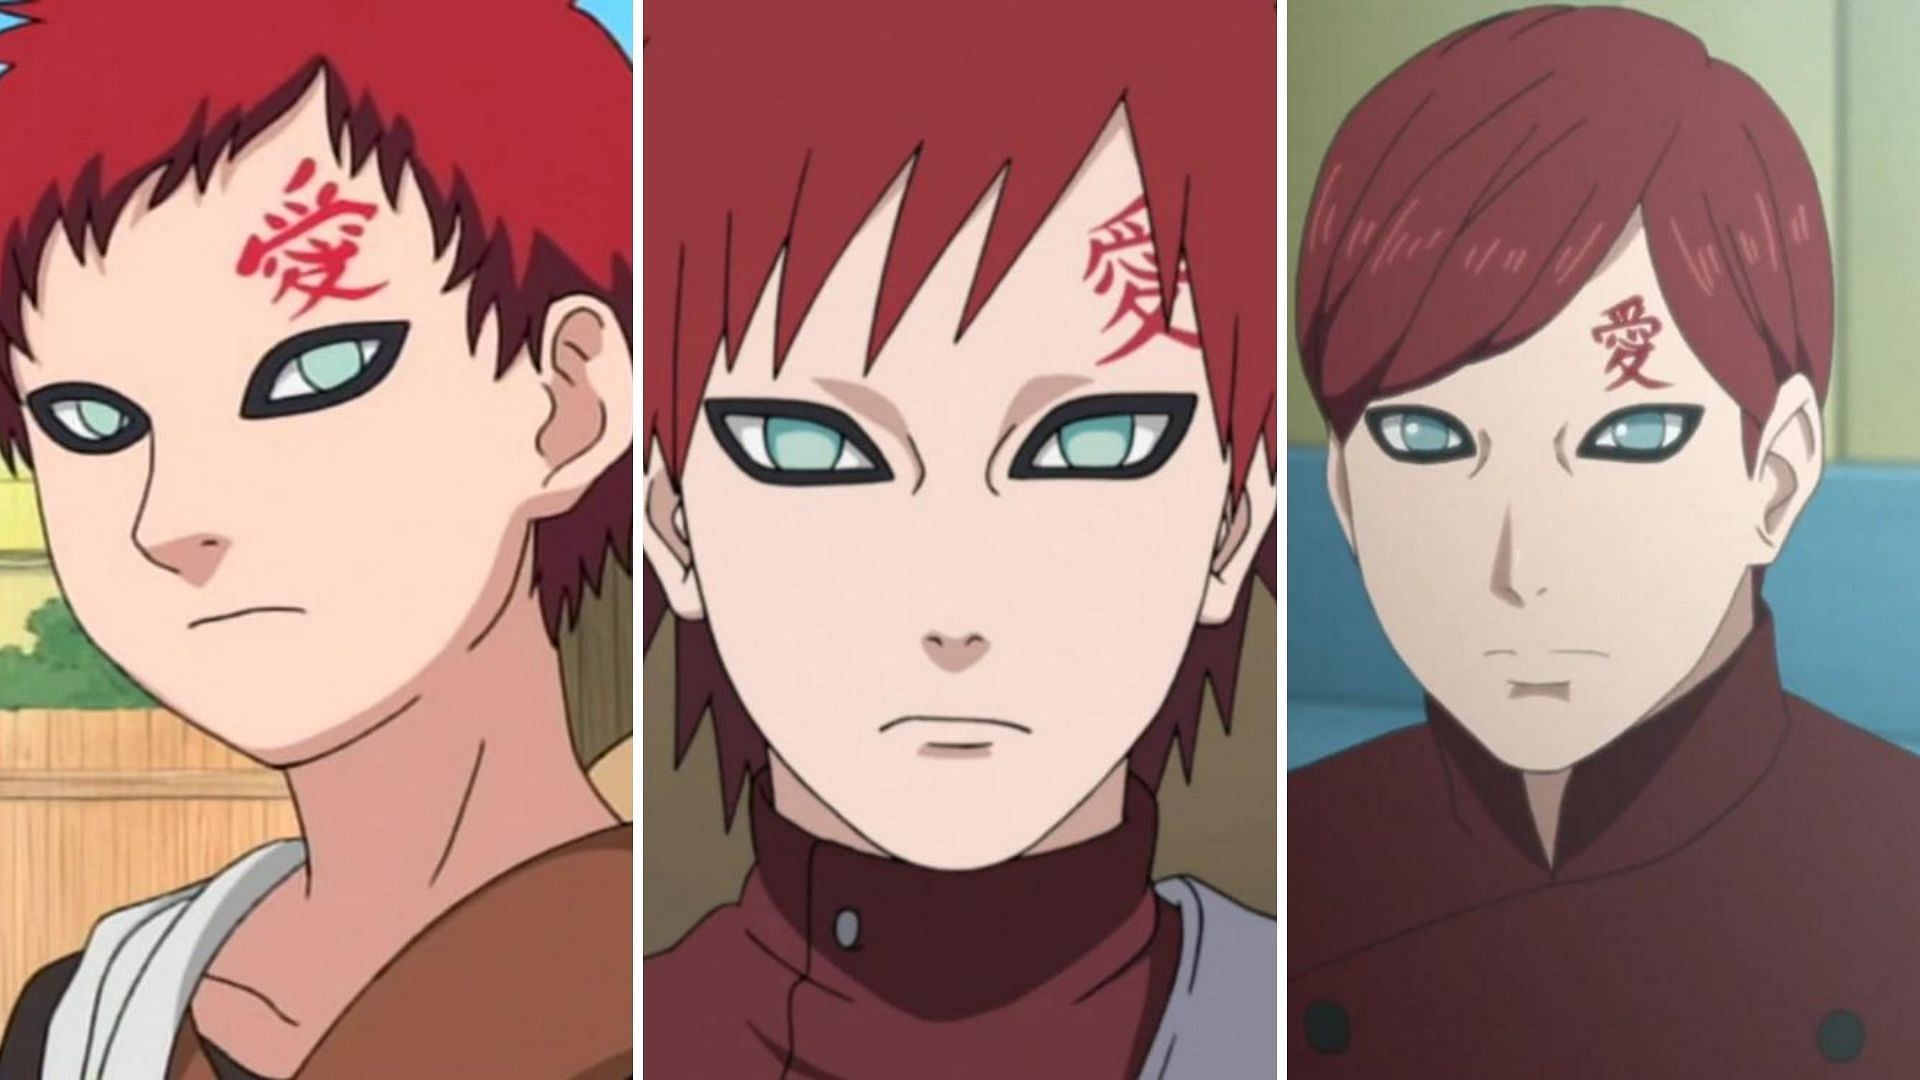 Gaara at different ages (Images via Naruto)